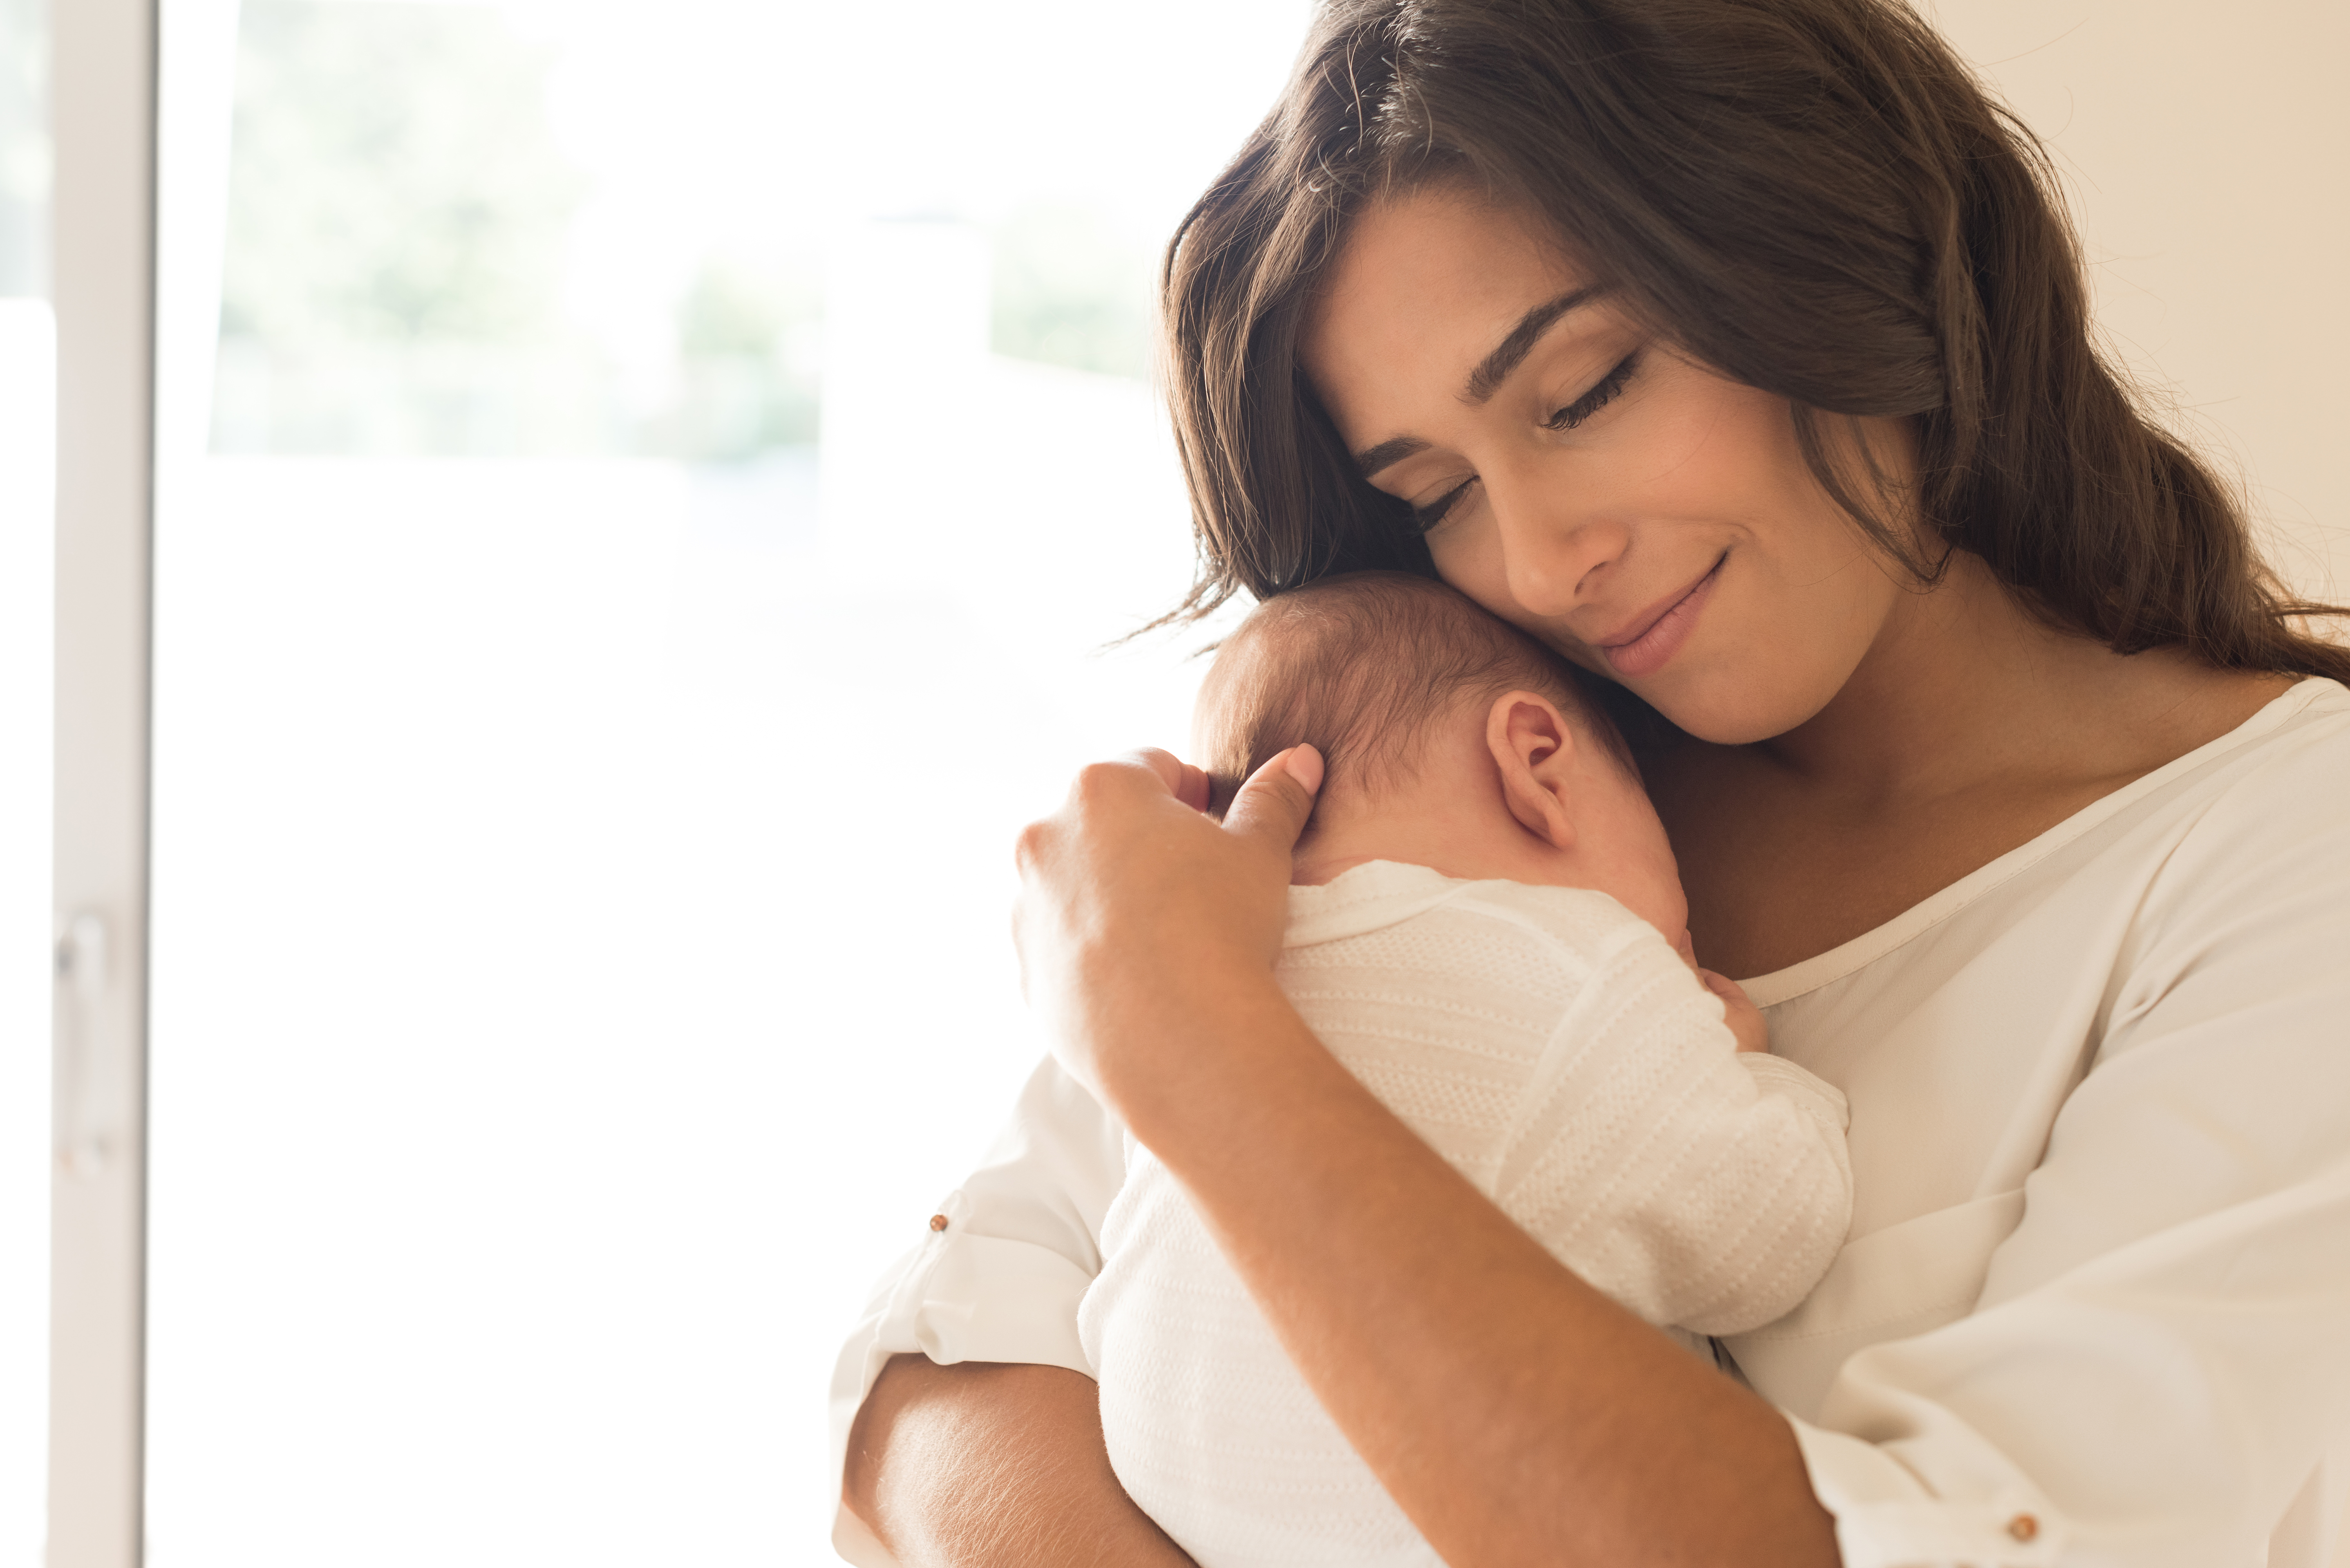 A woman and her child | Source: Shutterstock